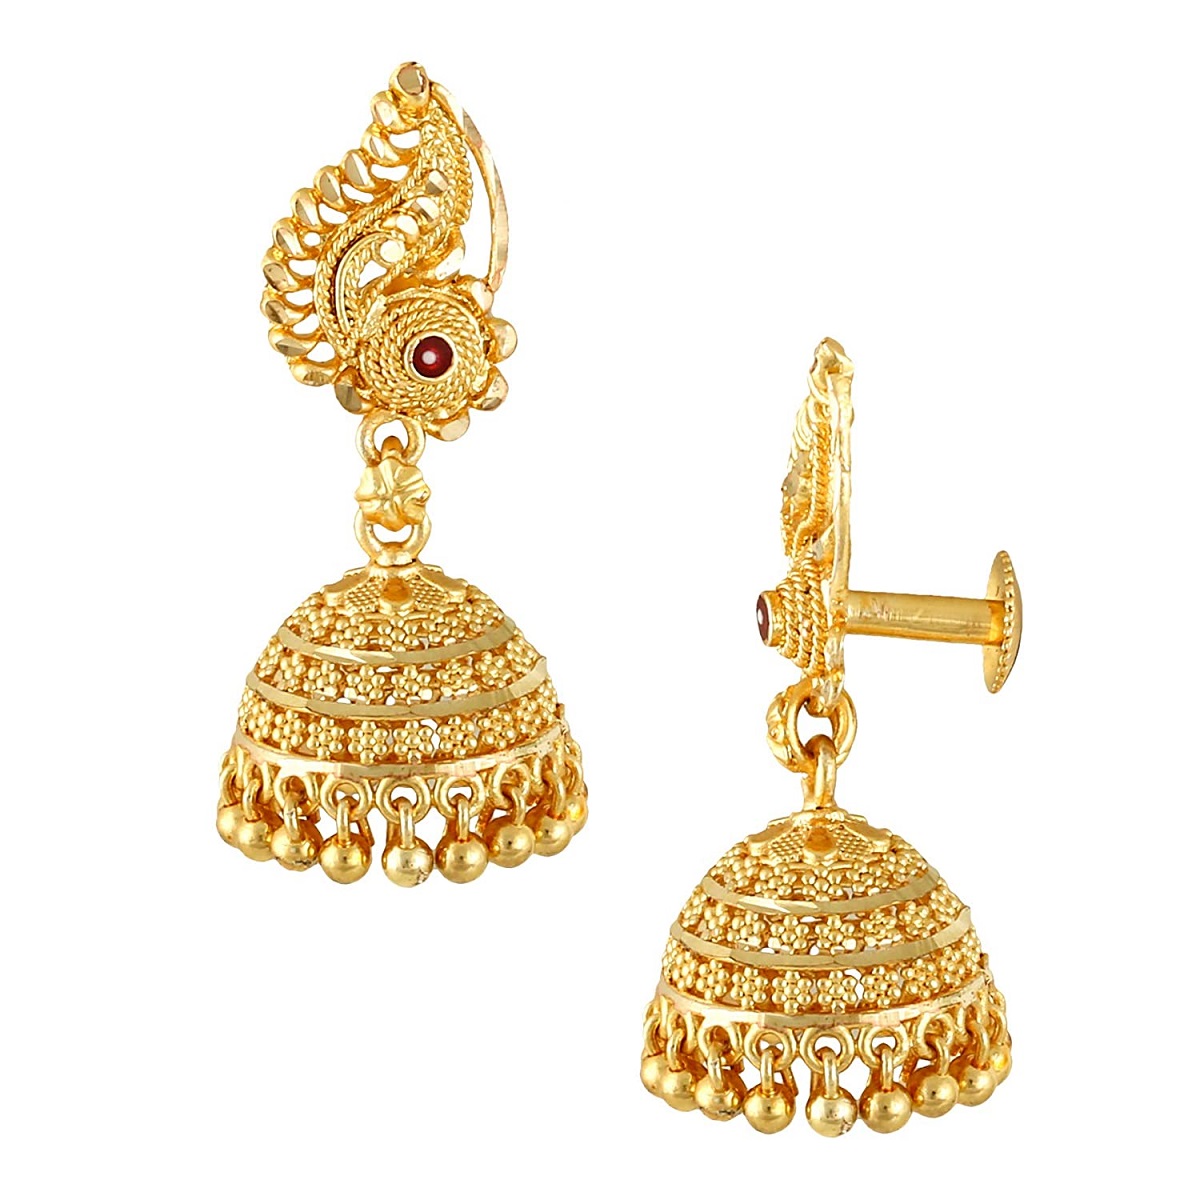 Beautiful Indian Jewellery, a Must-Have Collection for Every Woman